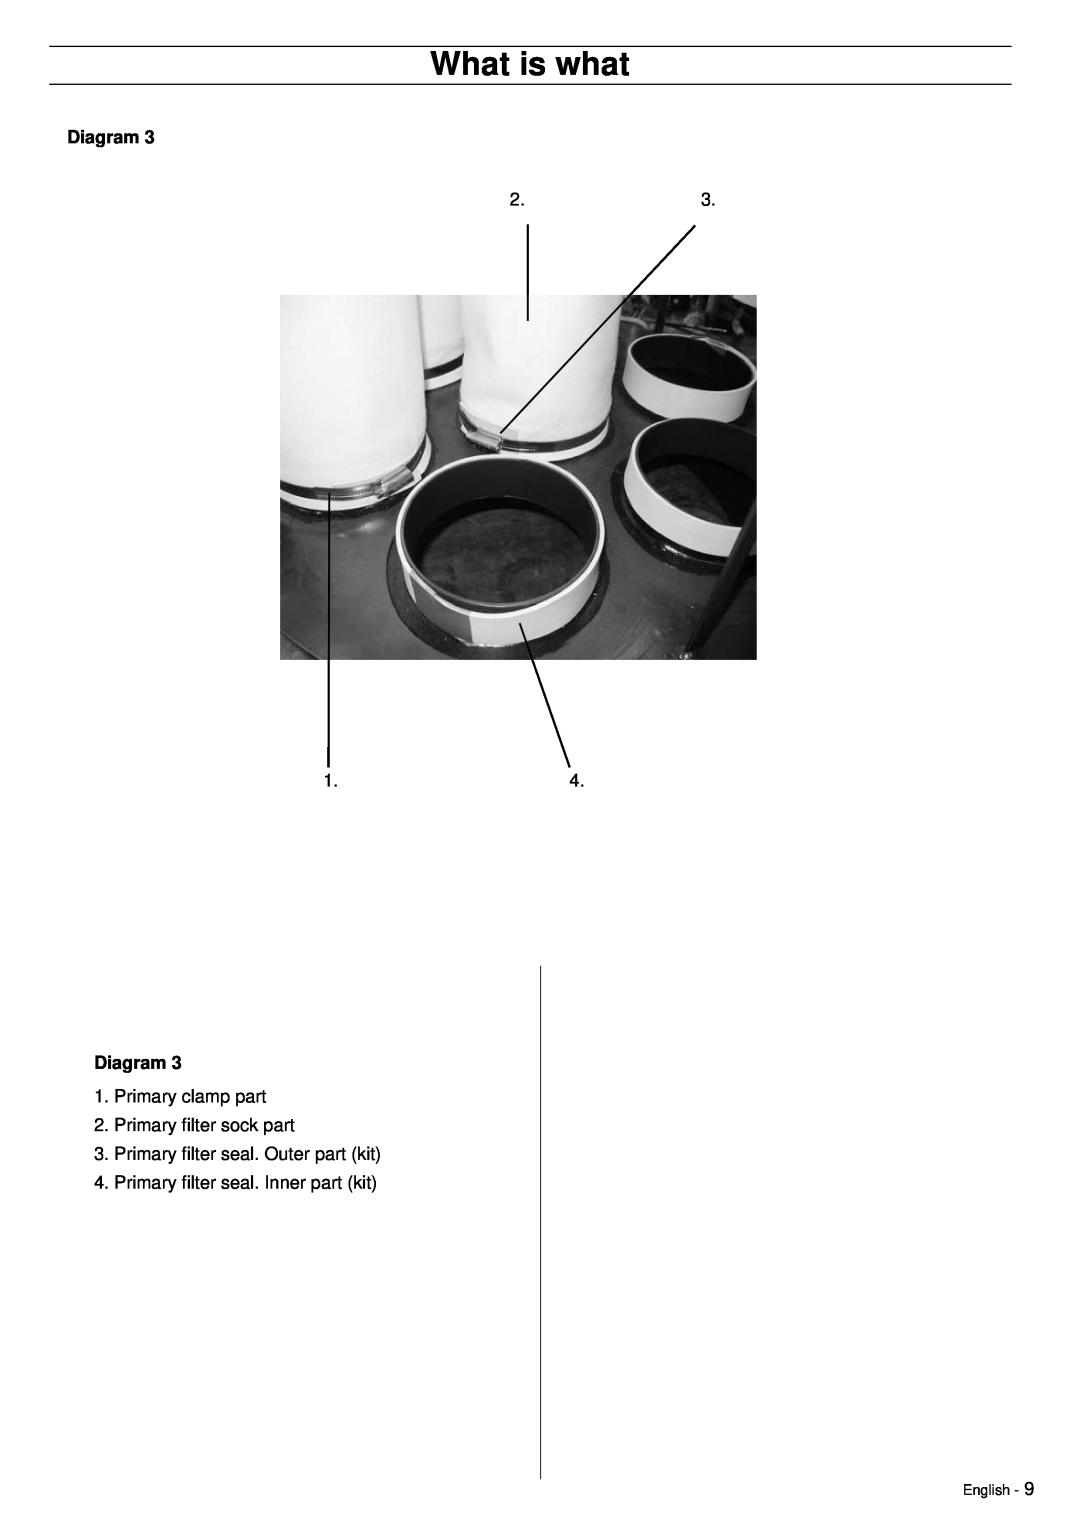 Husqvarna DC5500 What is what, Diagram, Primary clamp part 2.Primary ﬁlter sock part, Primary ﬁlter seal. Outer part kit 